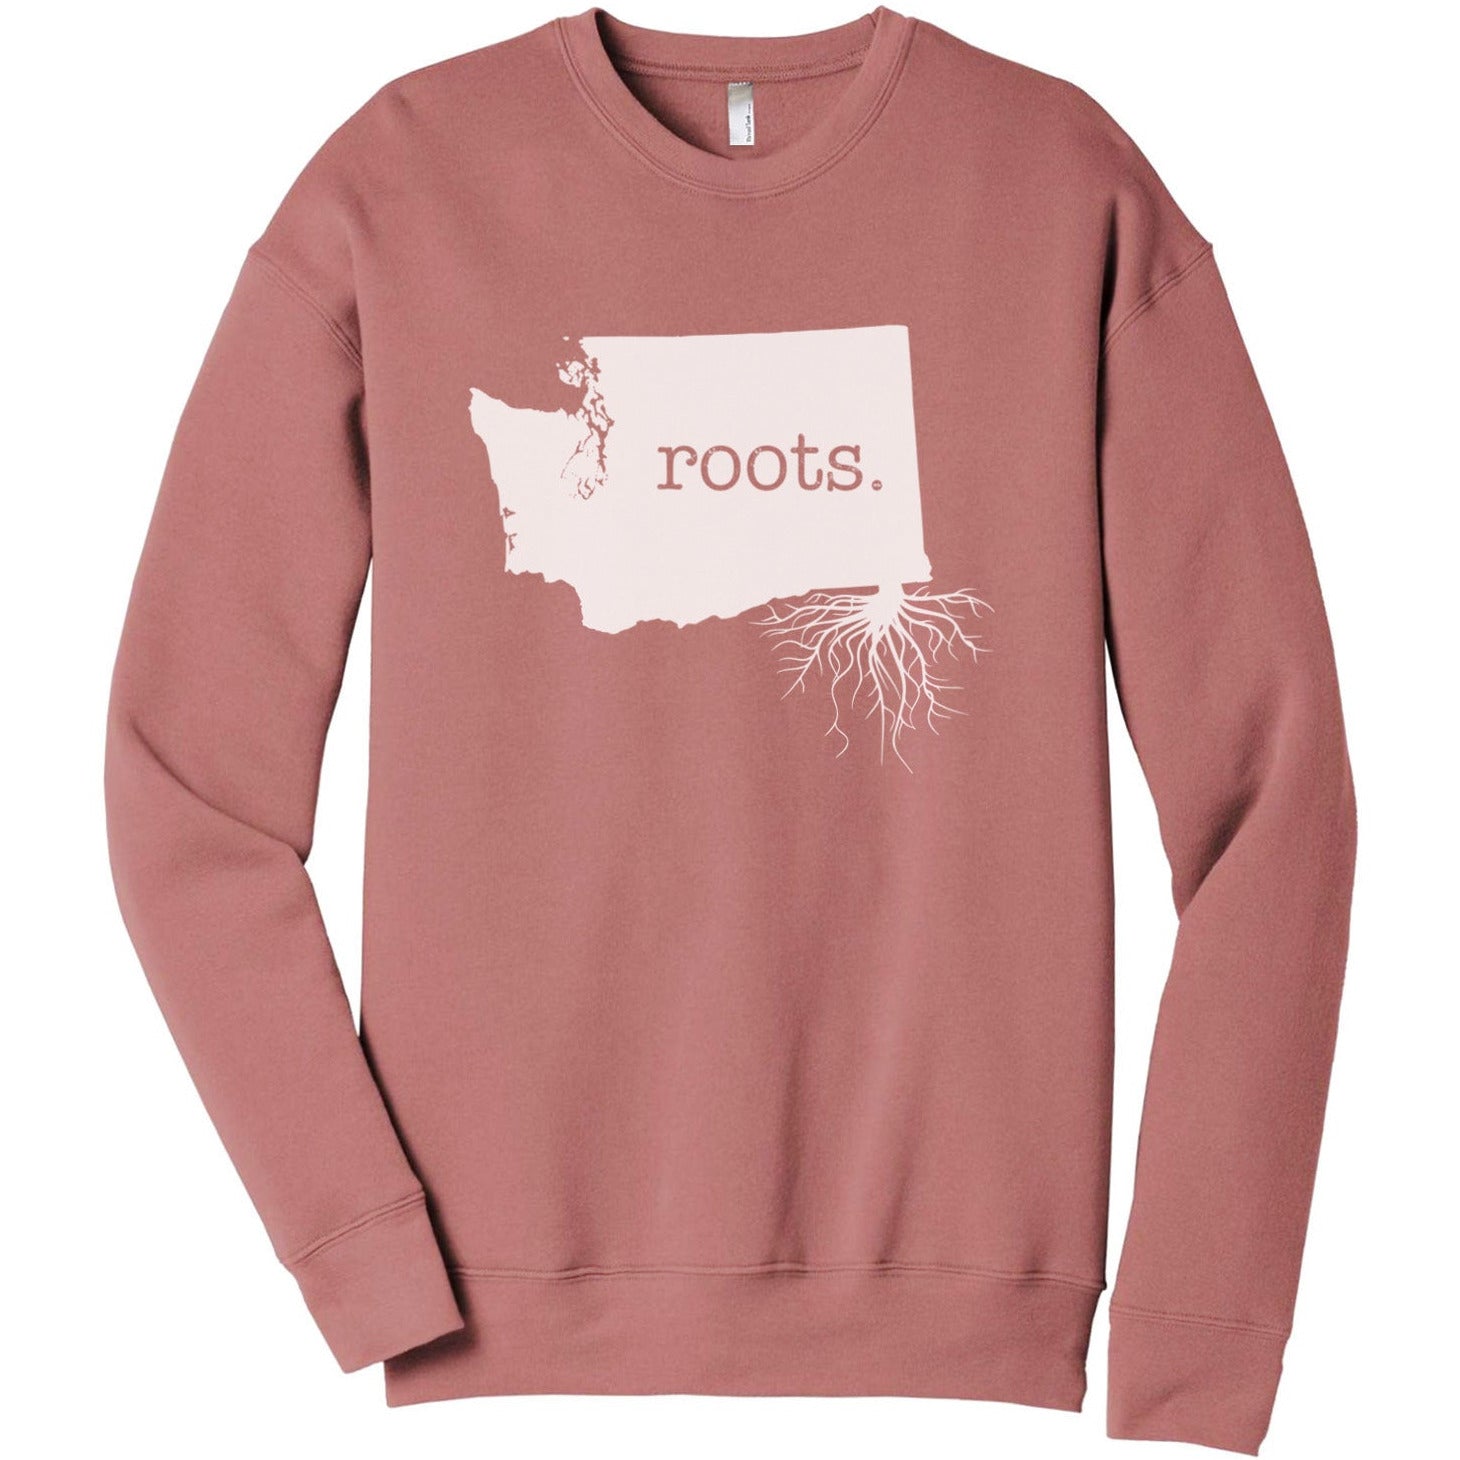 Roots State Washington - Stories You Can Wear